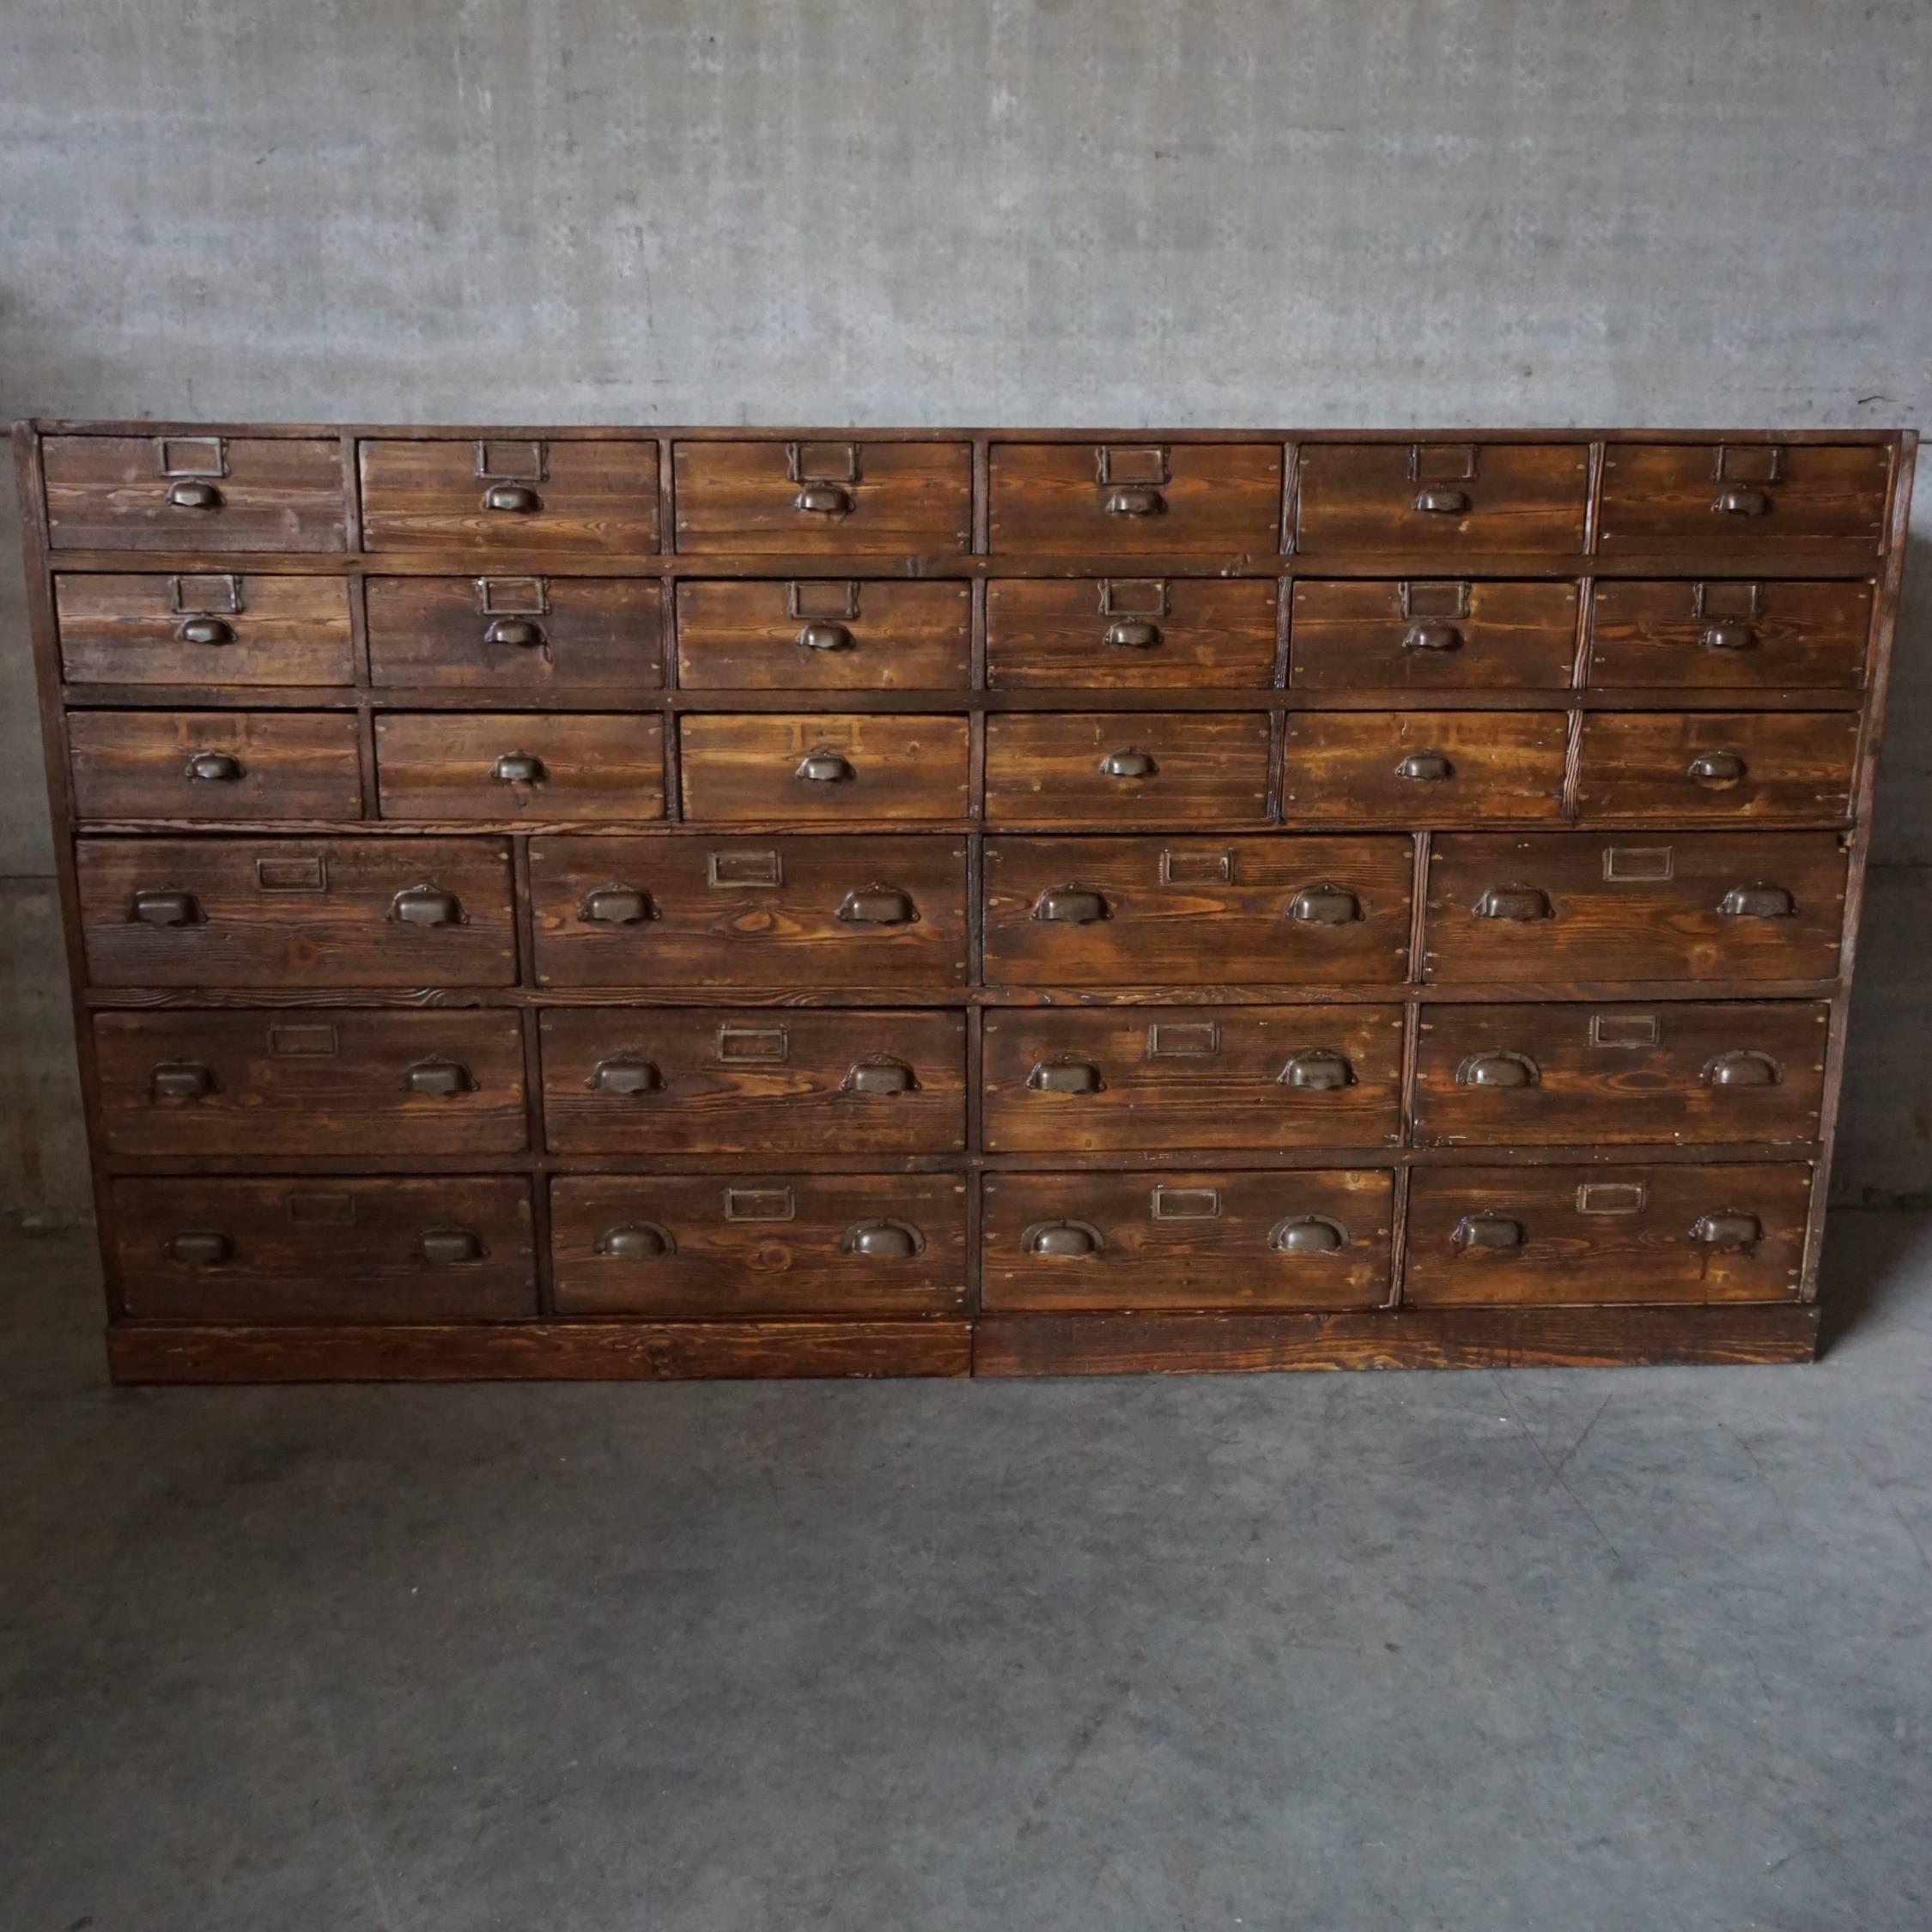 This apothecary bank of drawers was designed and made around 1920-1930. The piece is made from pine with cup handles. Some drawers have a divider which can be removed as a tray.